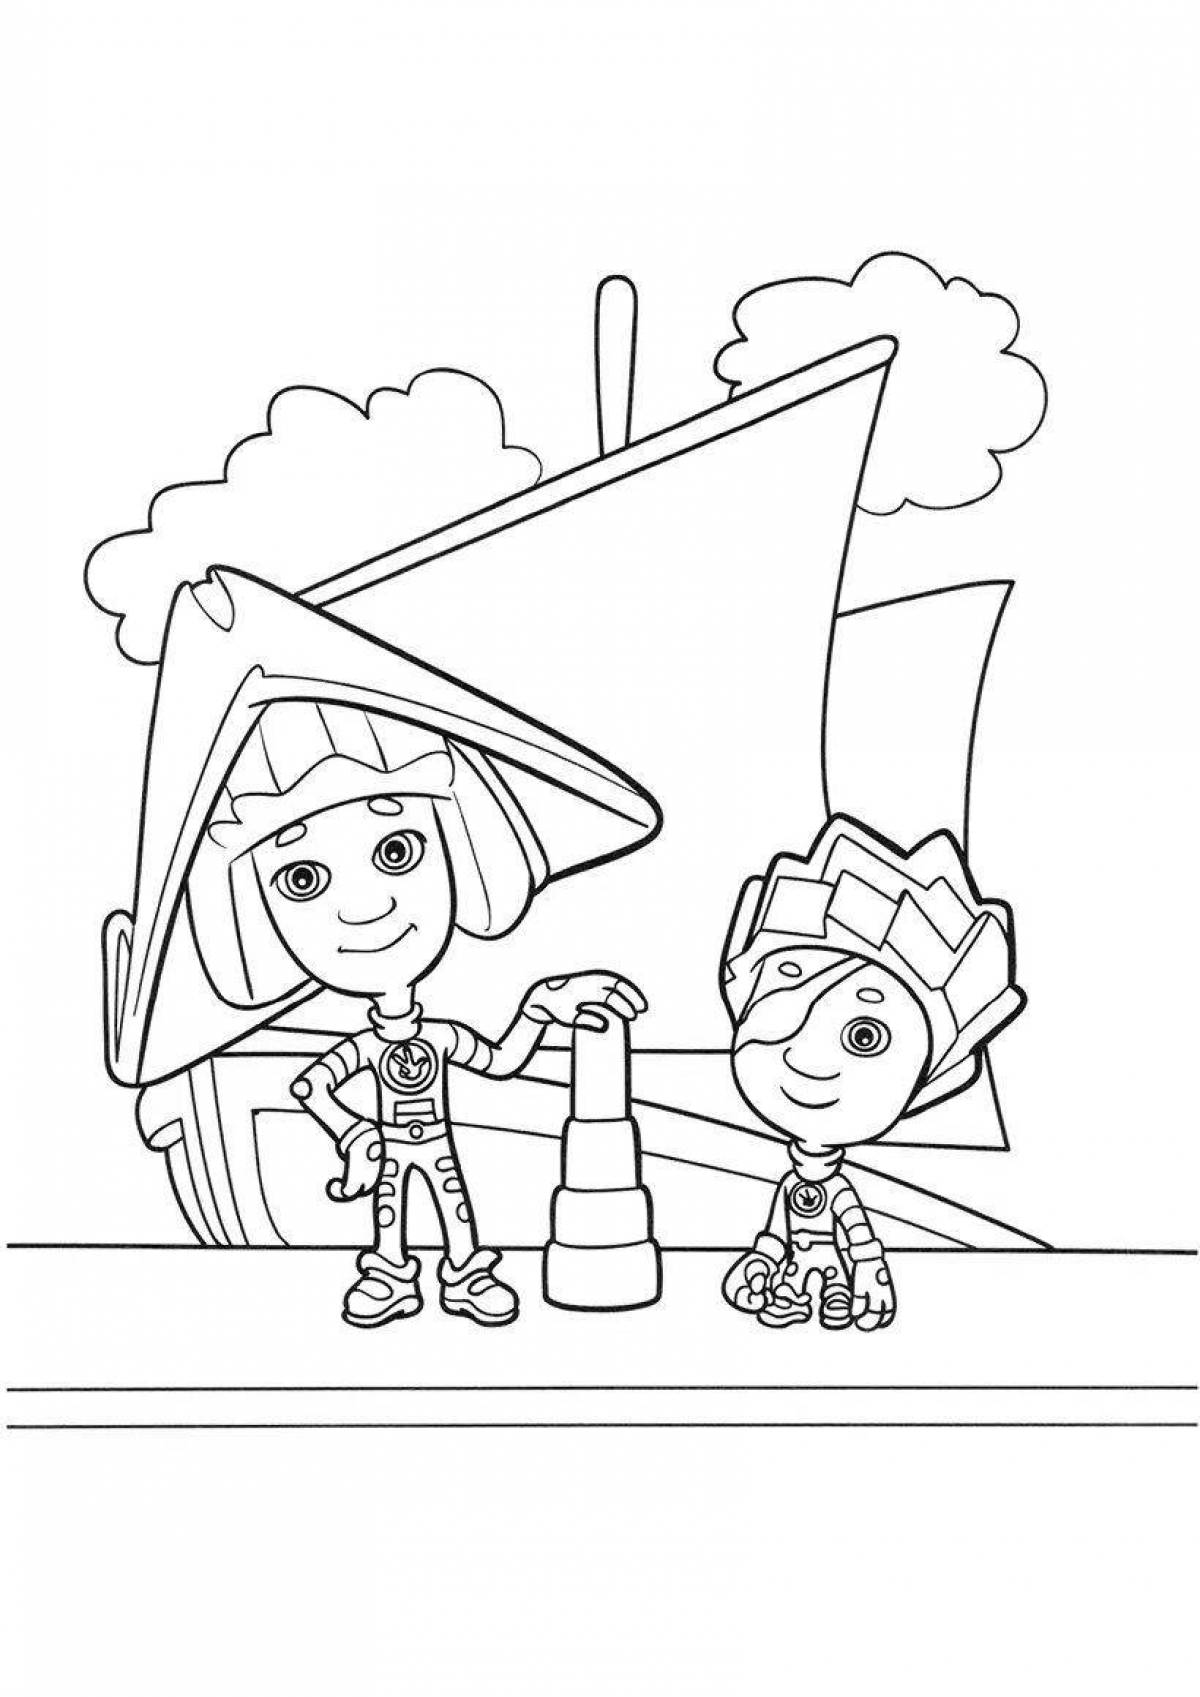 Charming fixies coloring pages